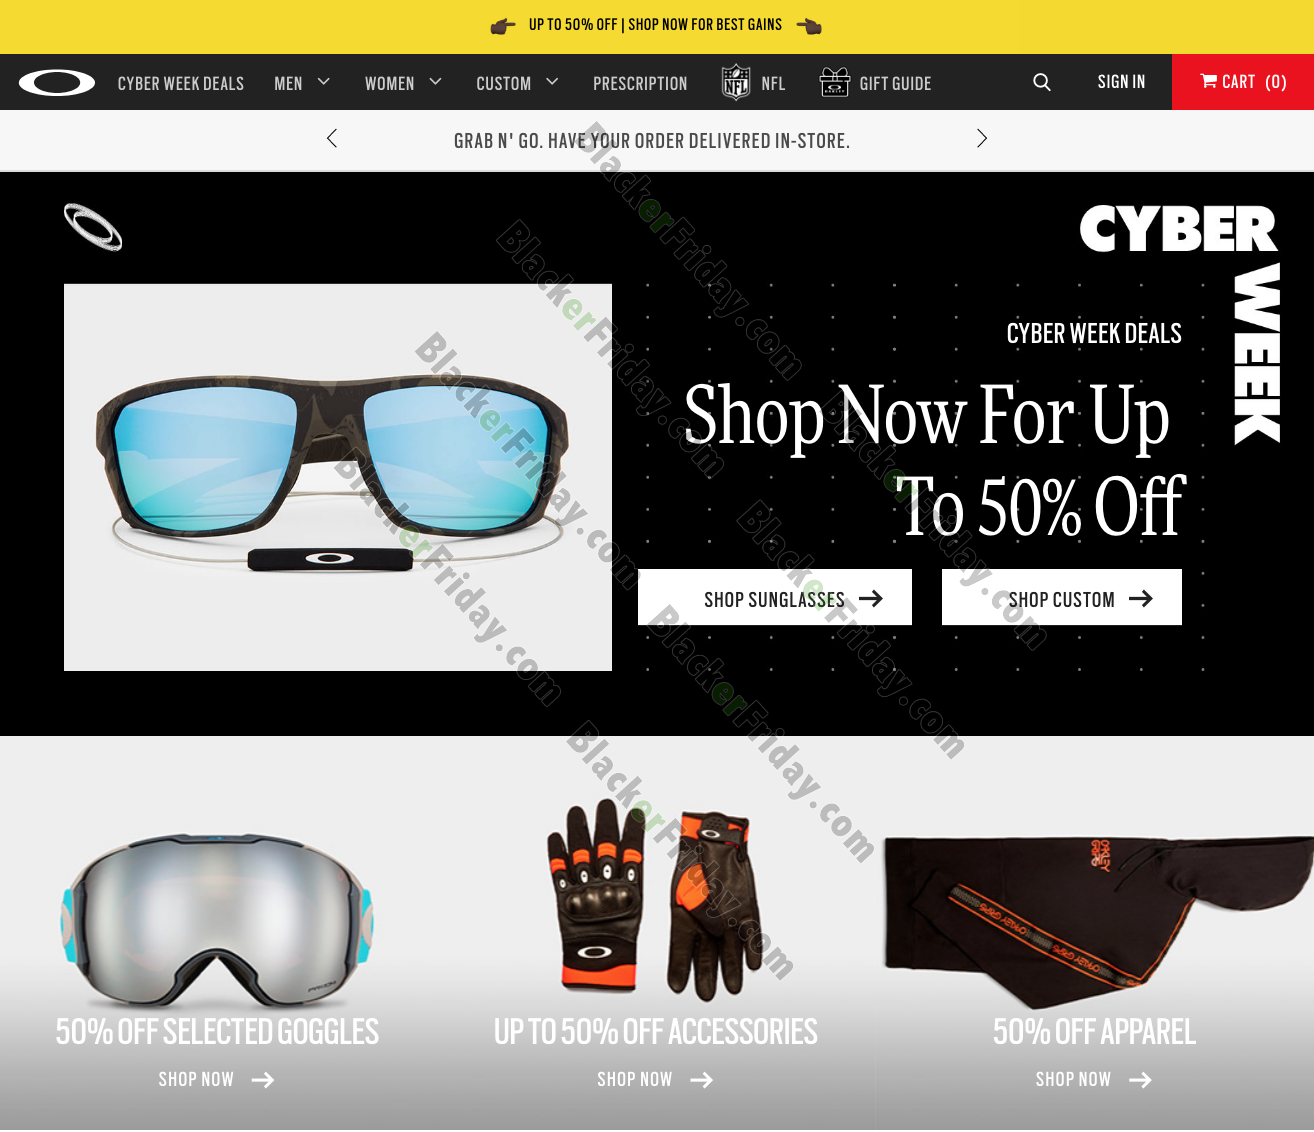 Oakley Cyber Monday Sale 2021 - What to 